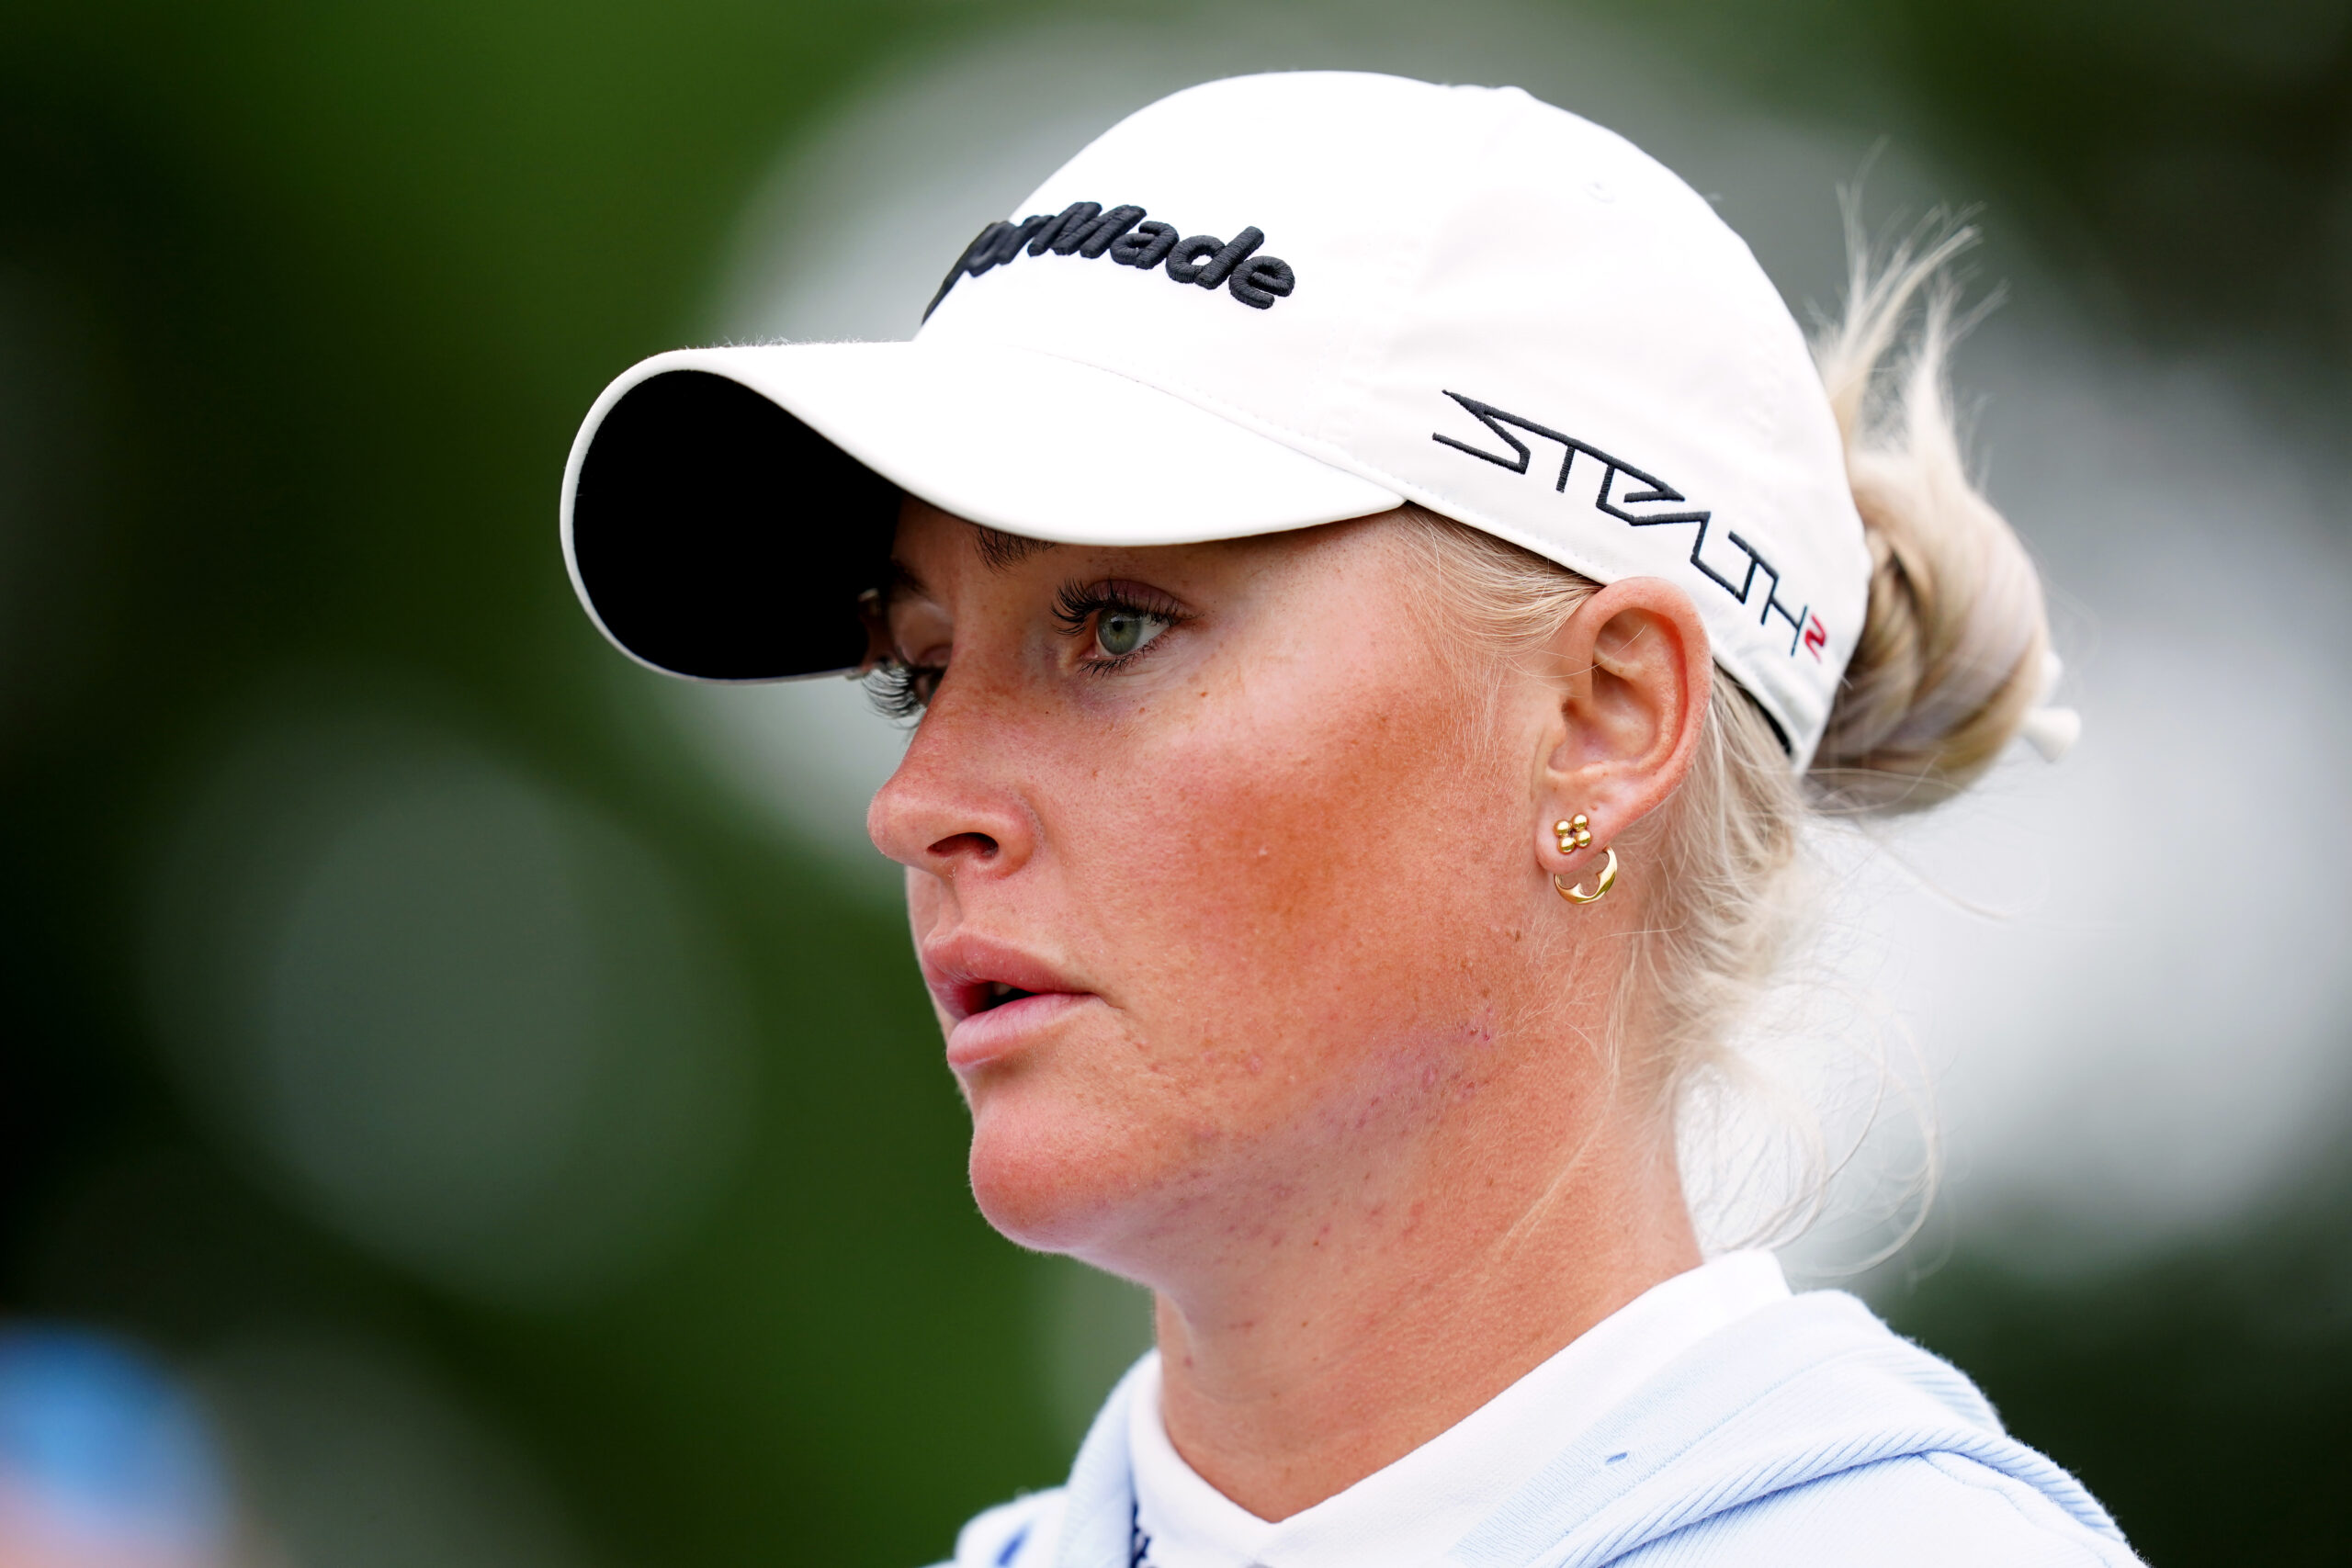 Charley Hull will head into the final round of the AIG Women’s Open with a share of the lead